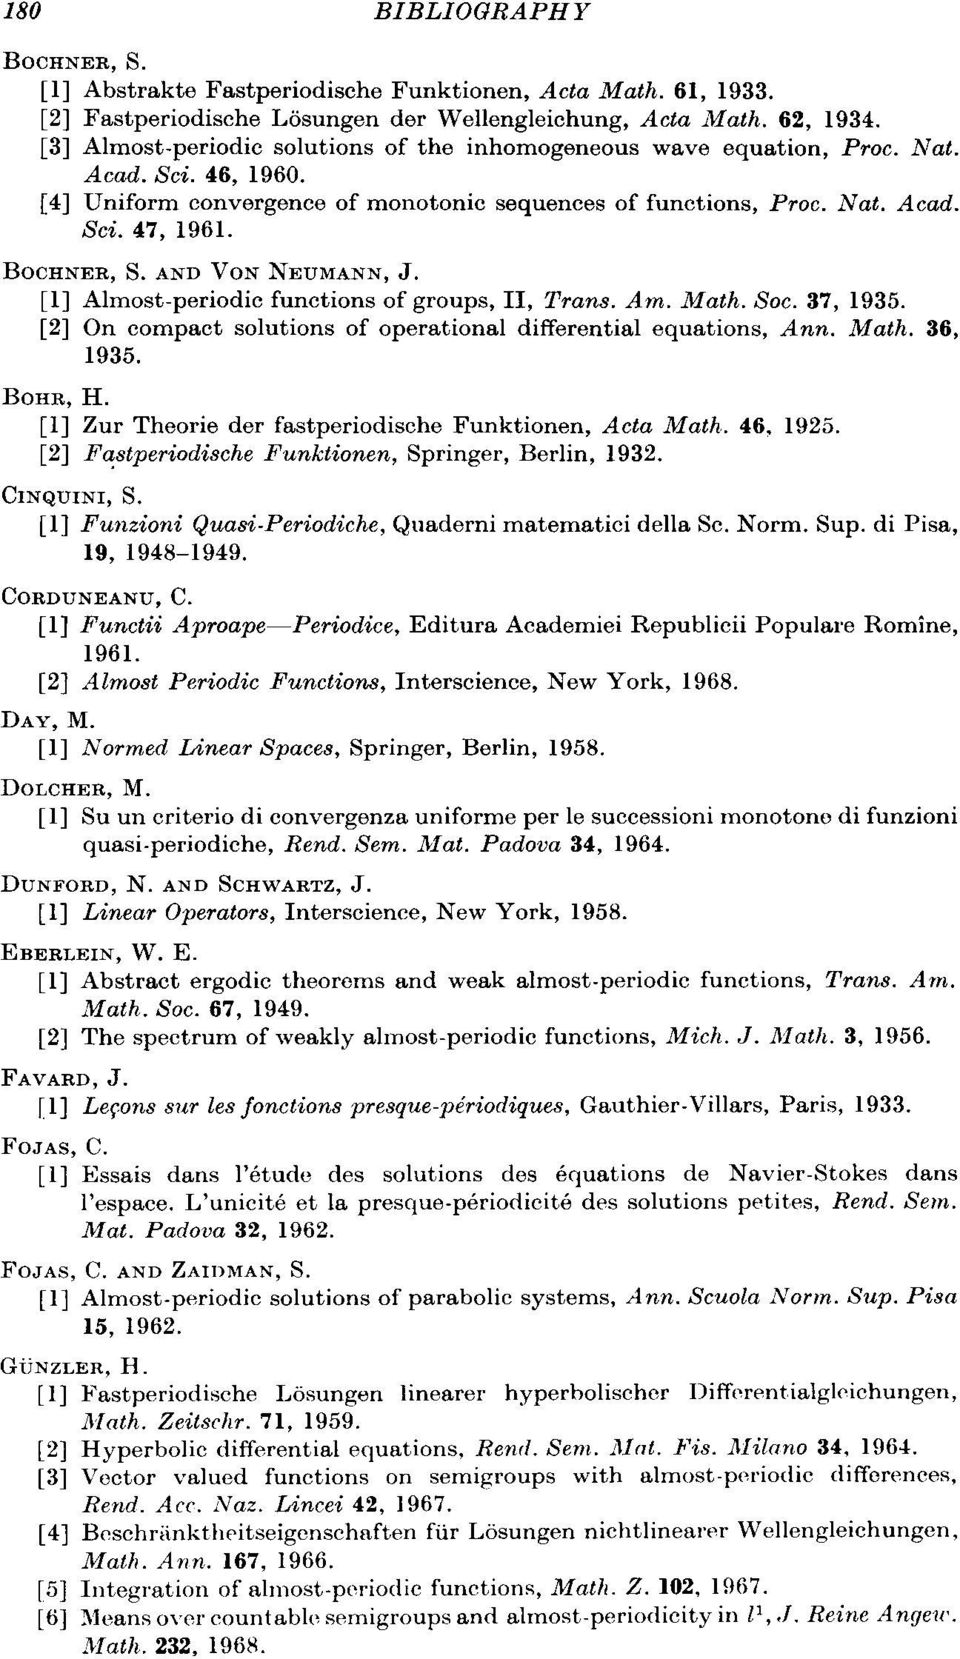 BOCHNER, S. AND VON NEUMANN, J. [1] Almost-periodic functions of groups, II, Trans. Am. Math. Soc. 37, 1935. [2] On compact solutions of operational differential equations, Ann. Math. 36, 1935.